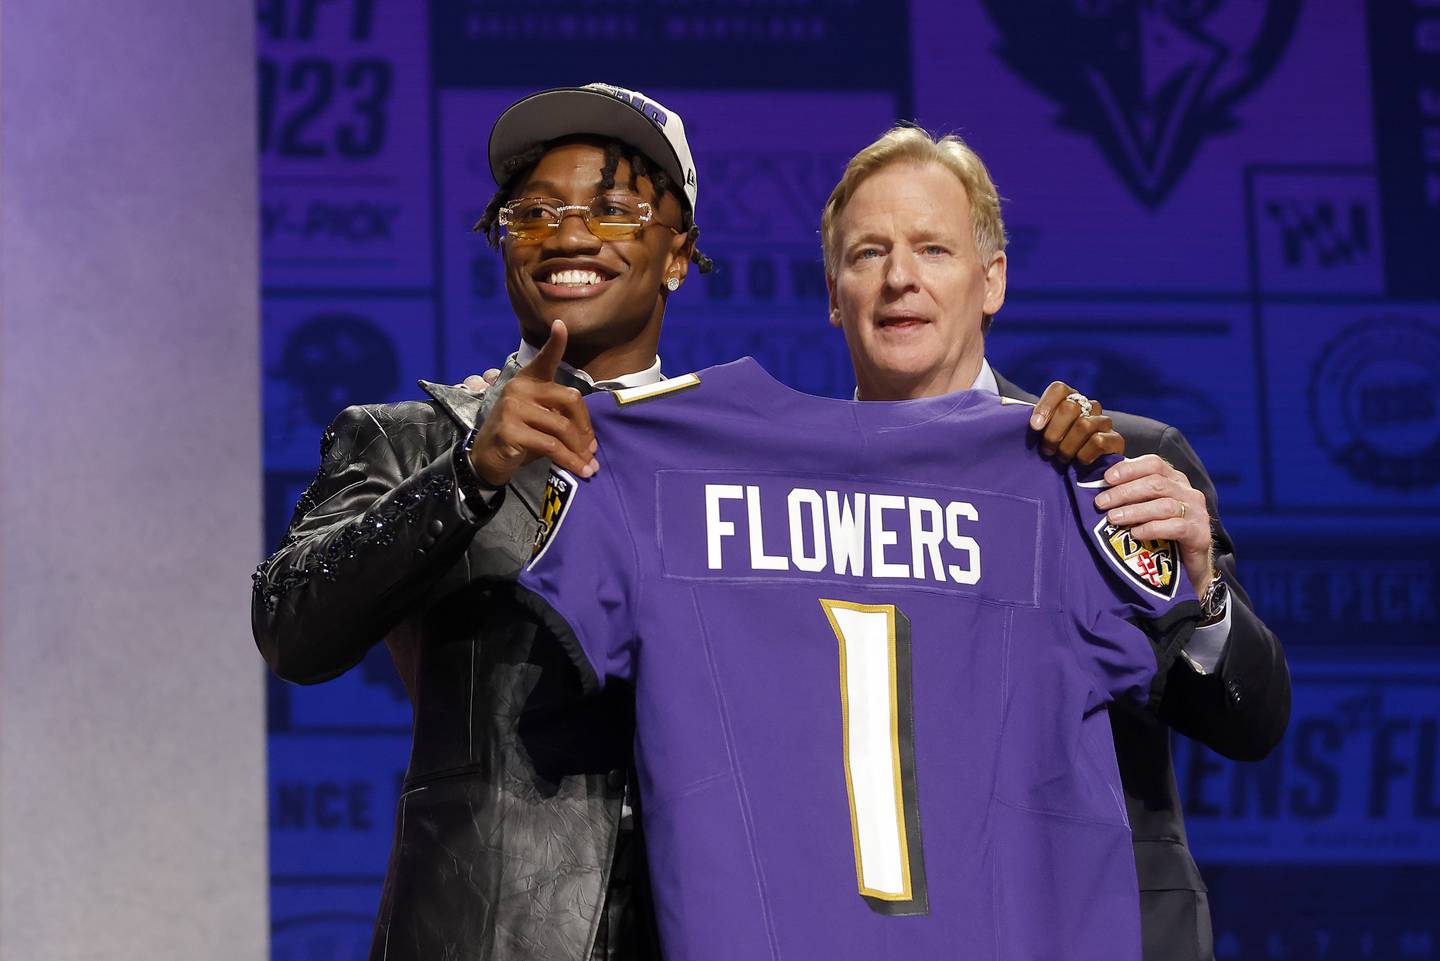 Zay Flowers poses with NFL Commissioner Roger Goodell after being selected 22nd overall by the Baltimore Ravens during the first round of the 2023 NFL Draft at Union Station on April 27, 2023 in Kansas City, Missouri.